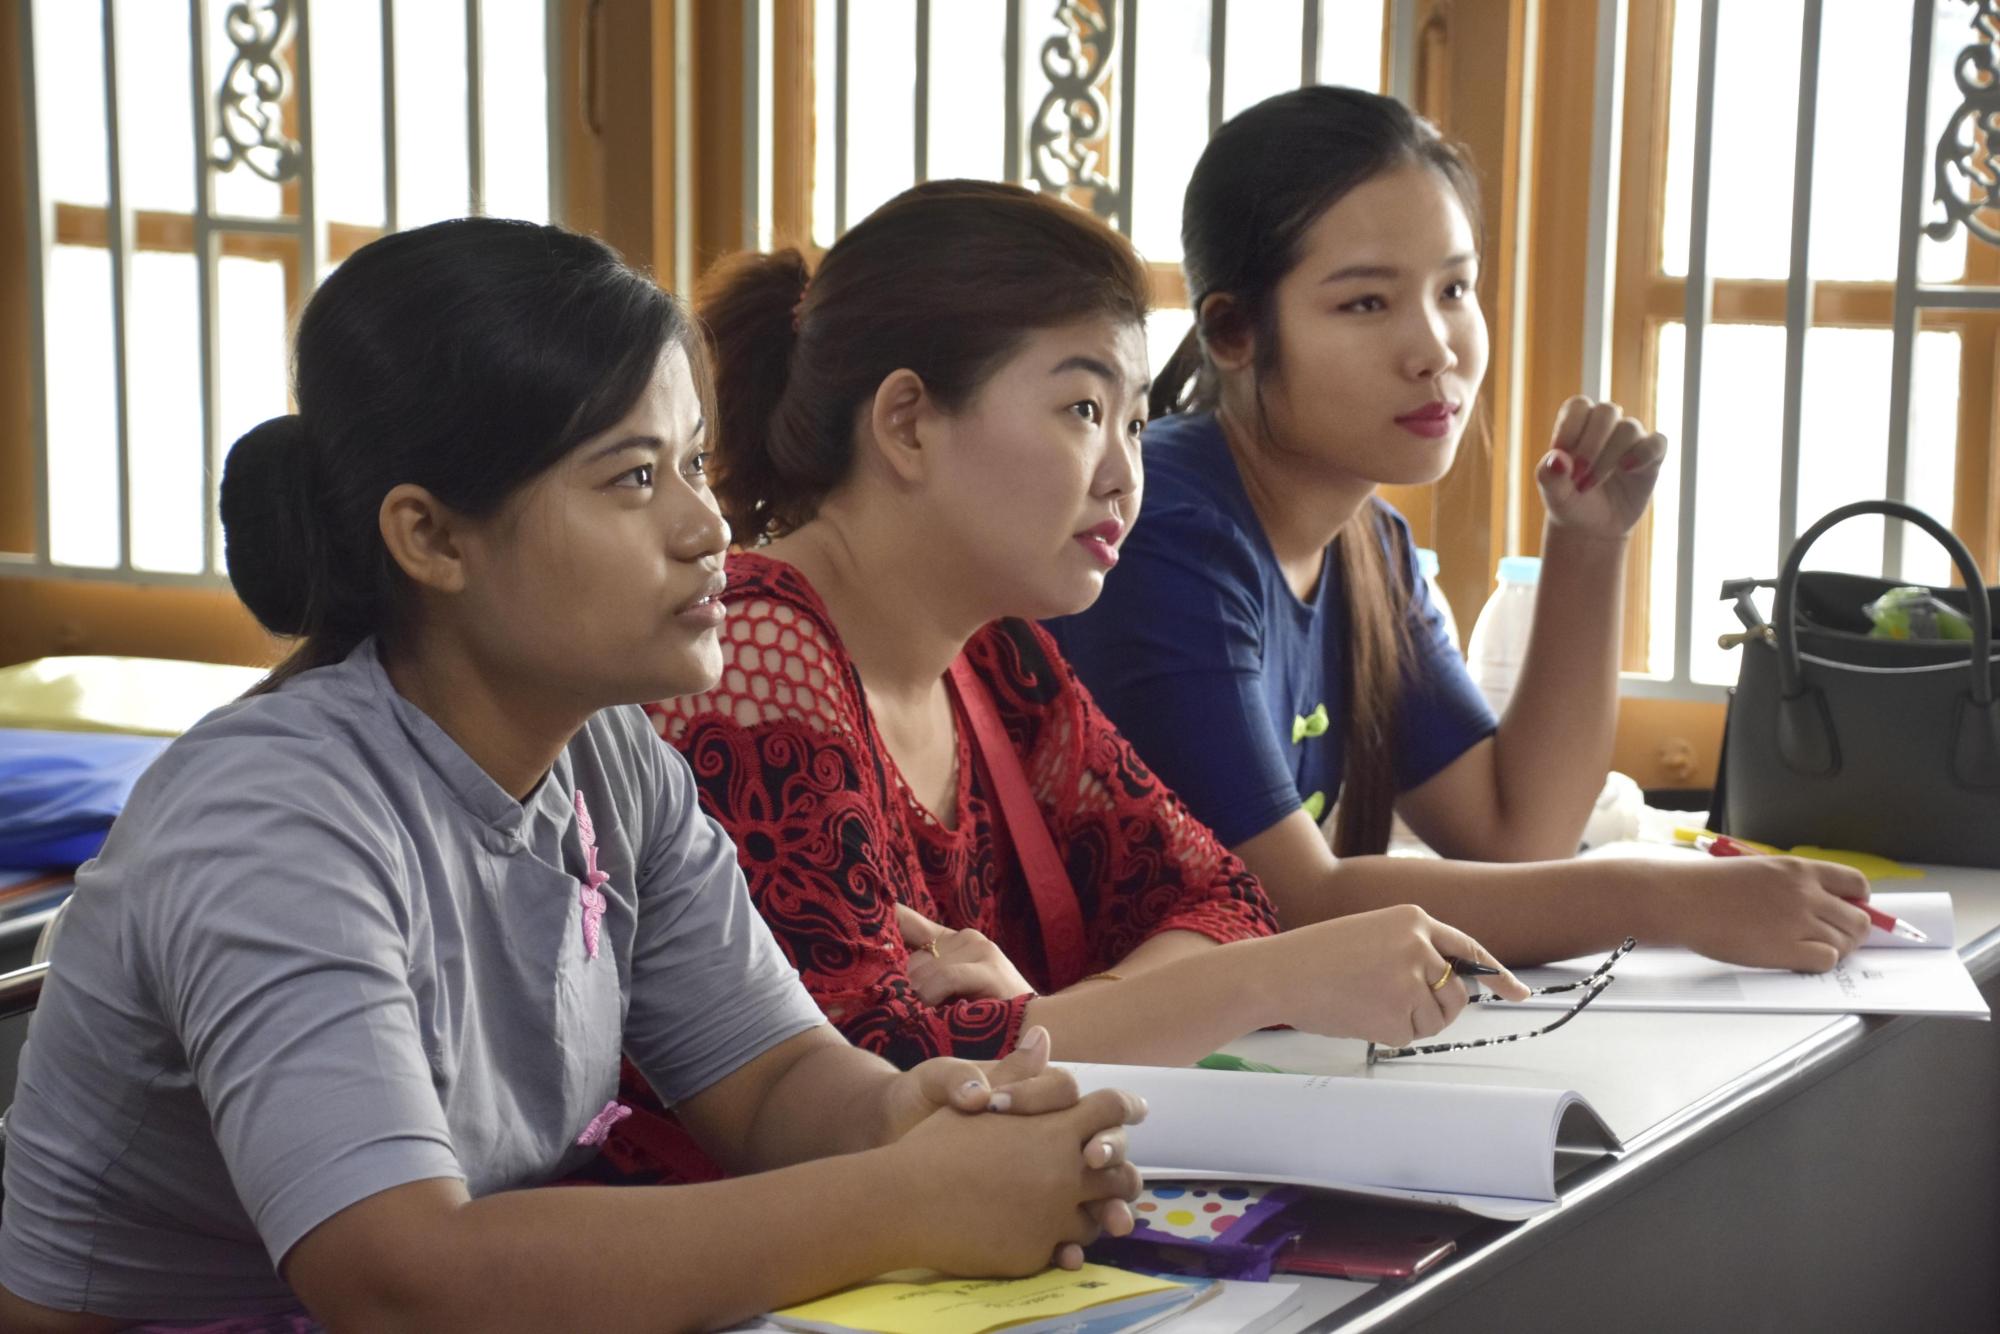 Myanmar women planning to go to Japan as foreign trainees and work as caregivers study Japanese at a school in Yangon in May. | KYODO